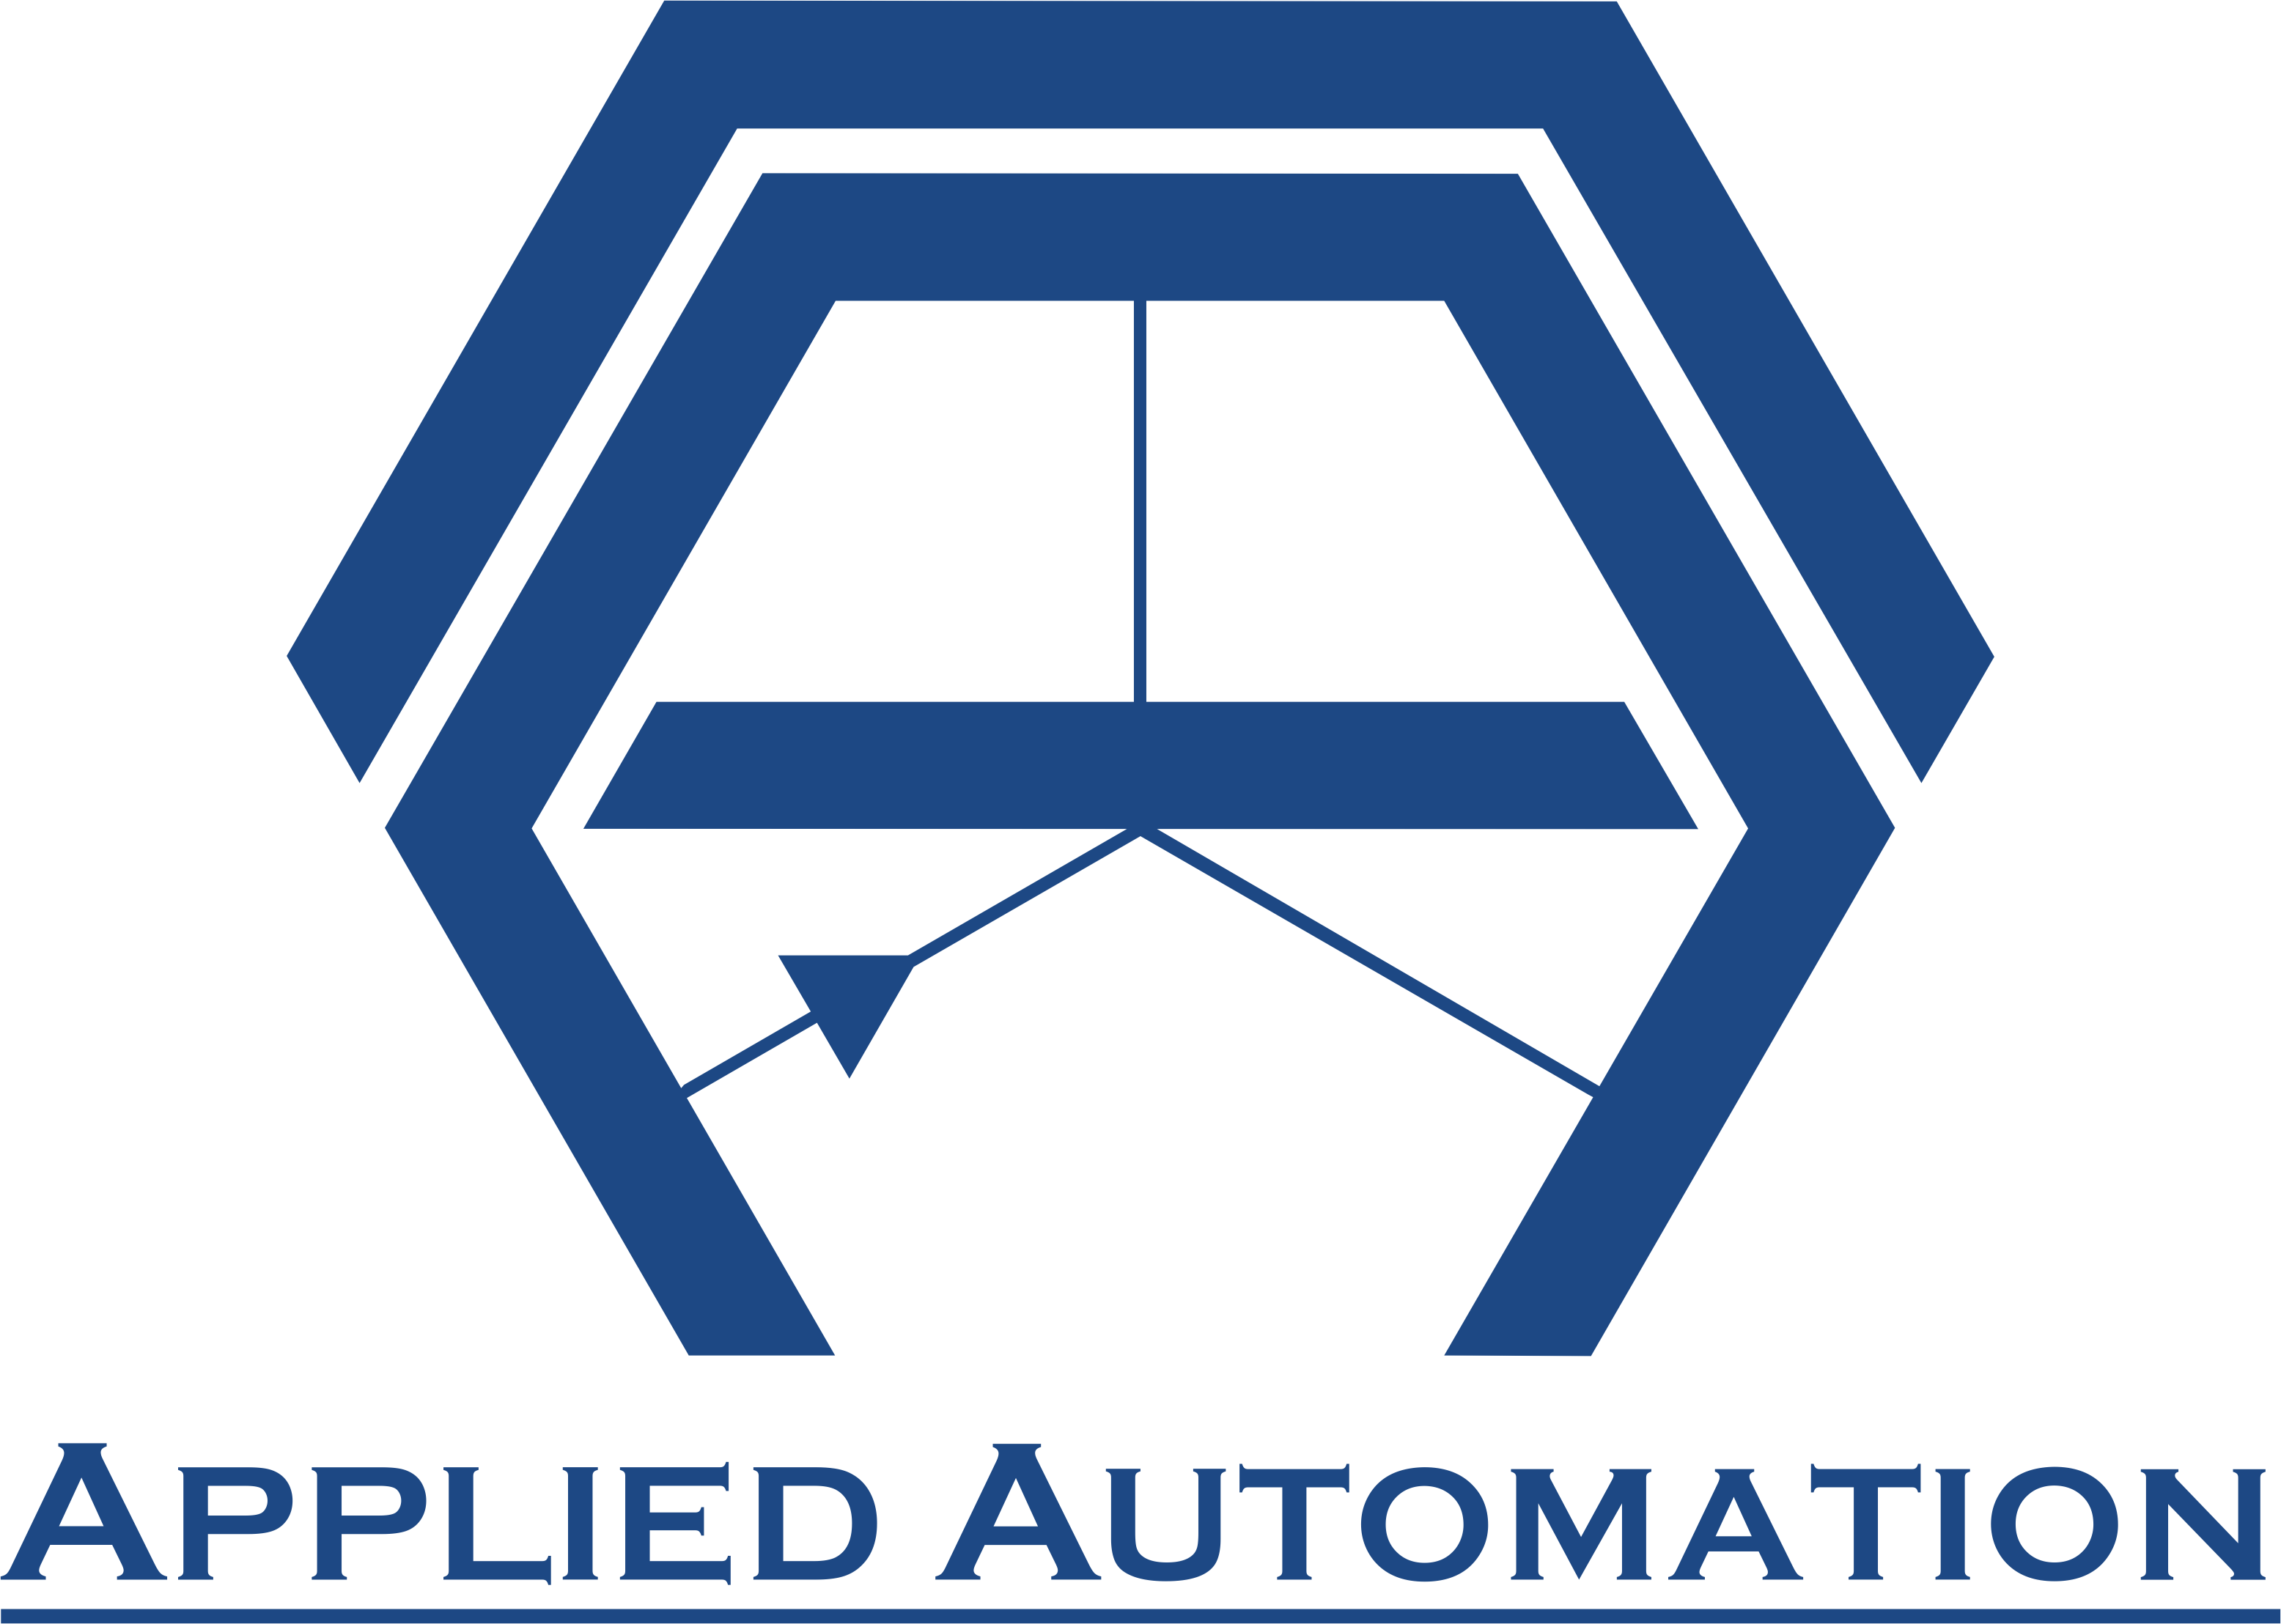 Applied Automation